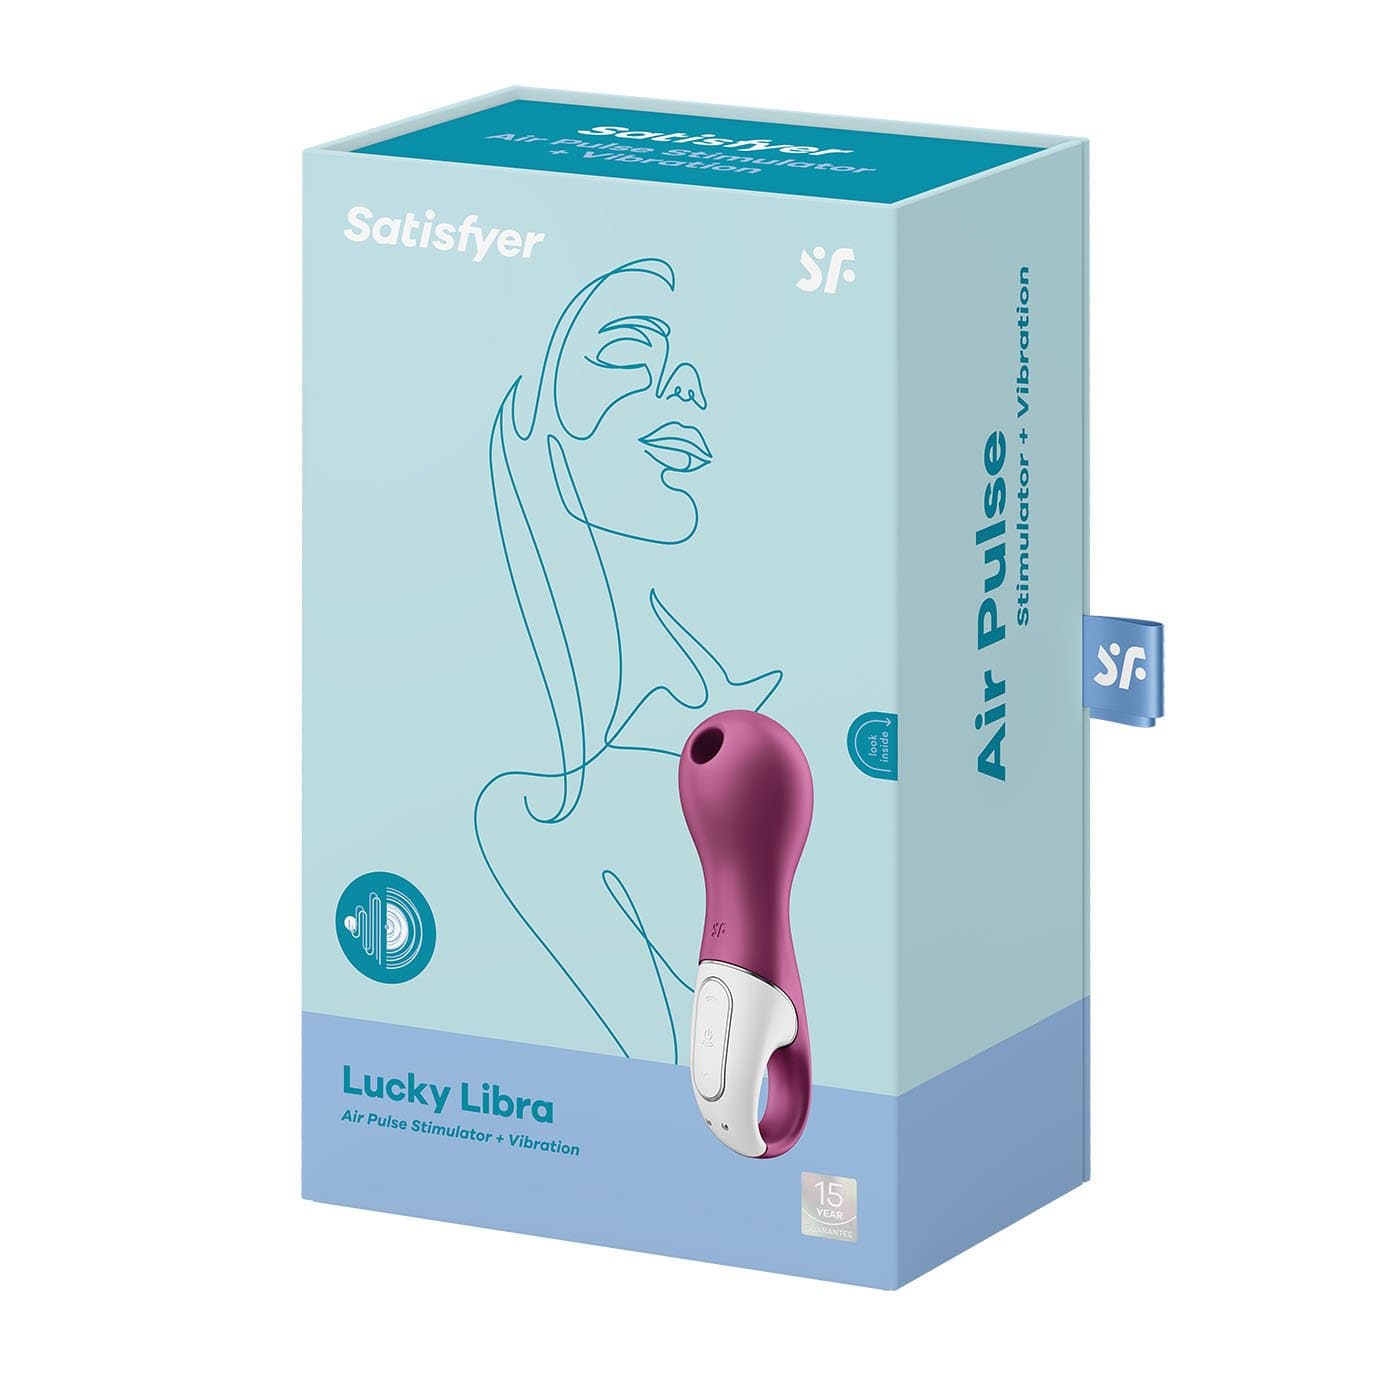 Satisfyer - Lucky Libra Air Pulse Clitoral Air Stimulator (Berry)    Clit Massager (Vibration) Rechargeable